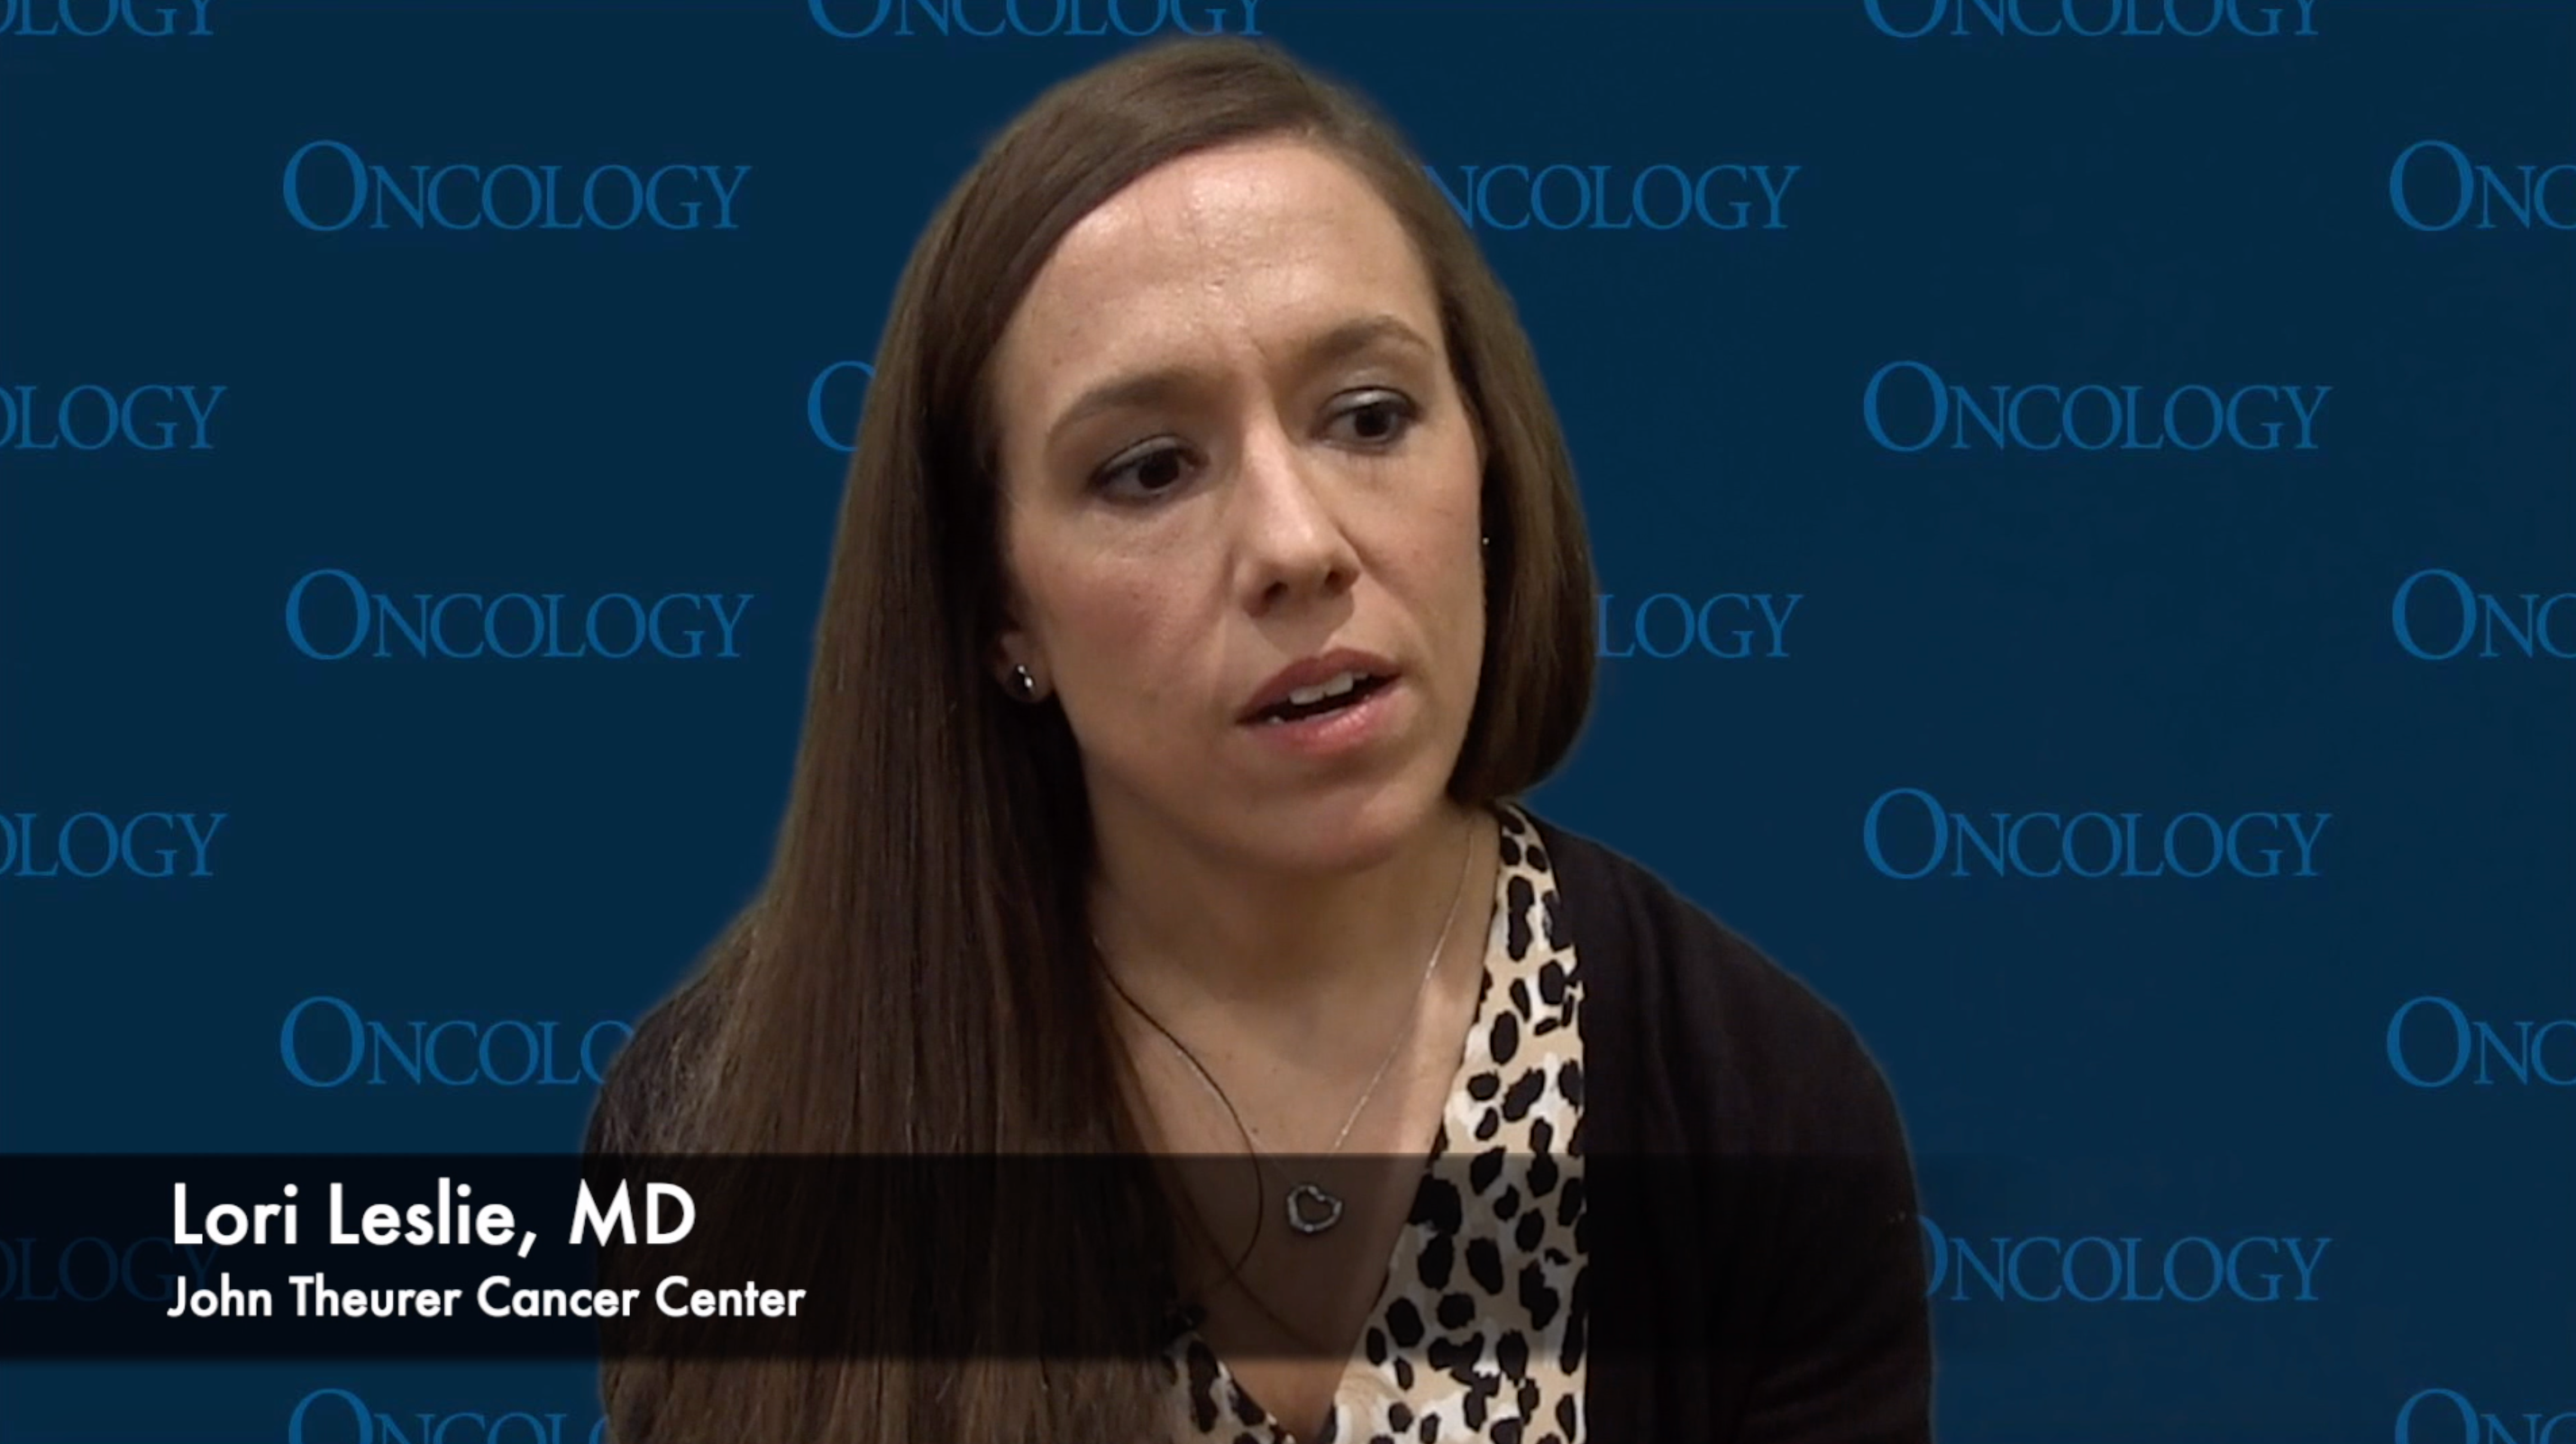 Lori Leslie, MD, Discusses the Real-World Differences Between Acalabrutinib and Ibrutinib